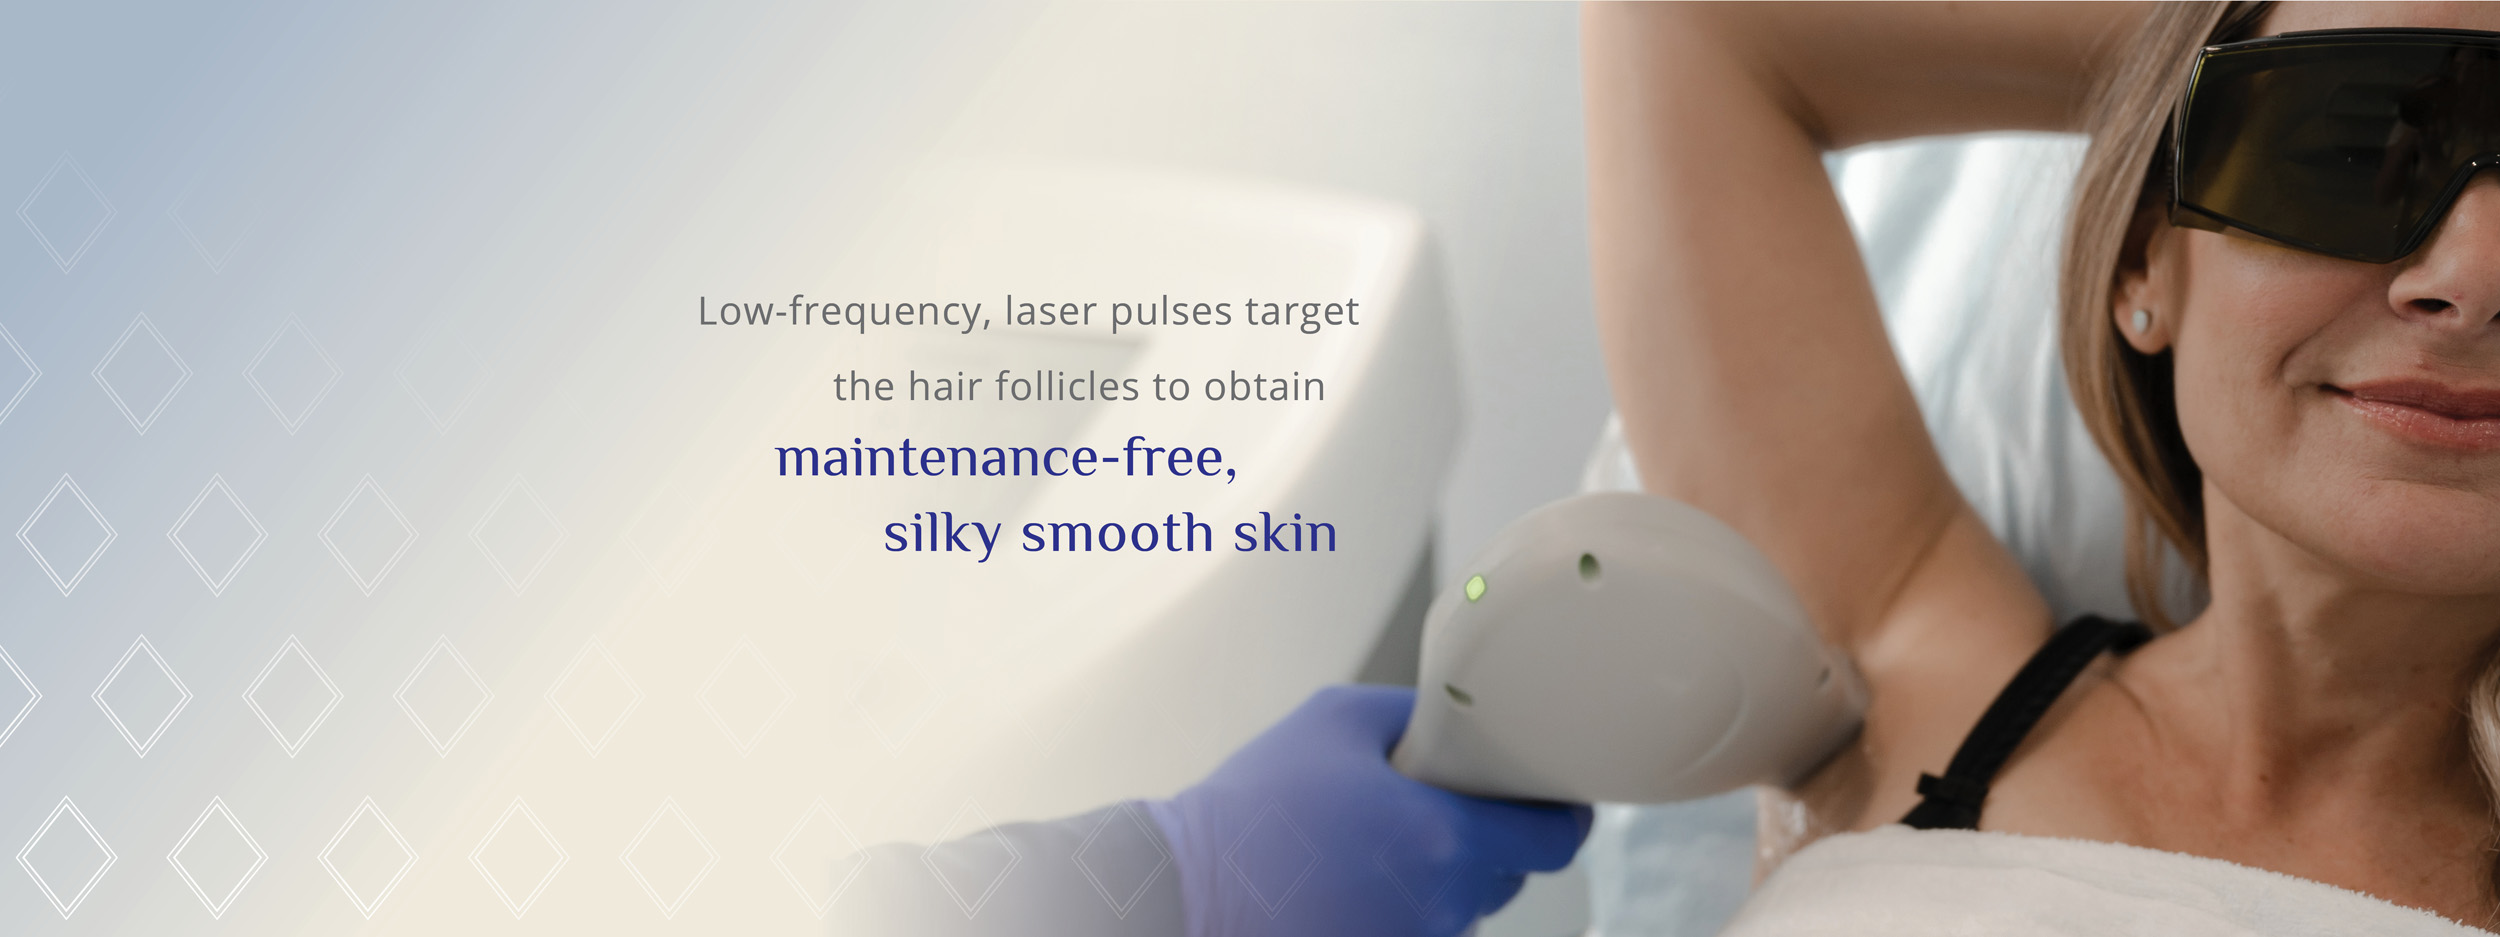 Laser Hair Removal from NeoSkin Medical Spa in Hudson Ohio